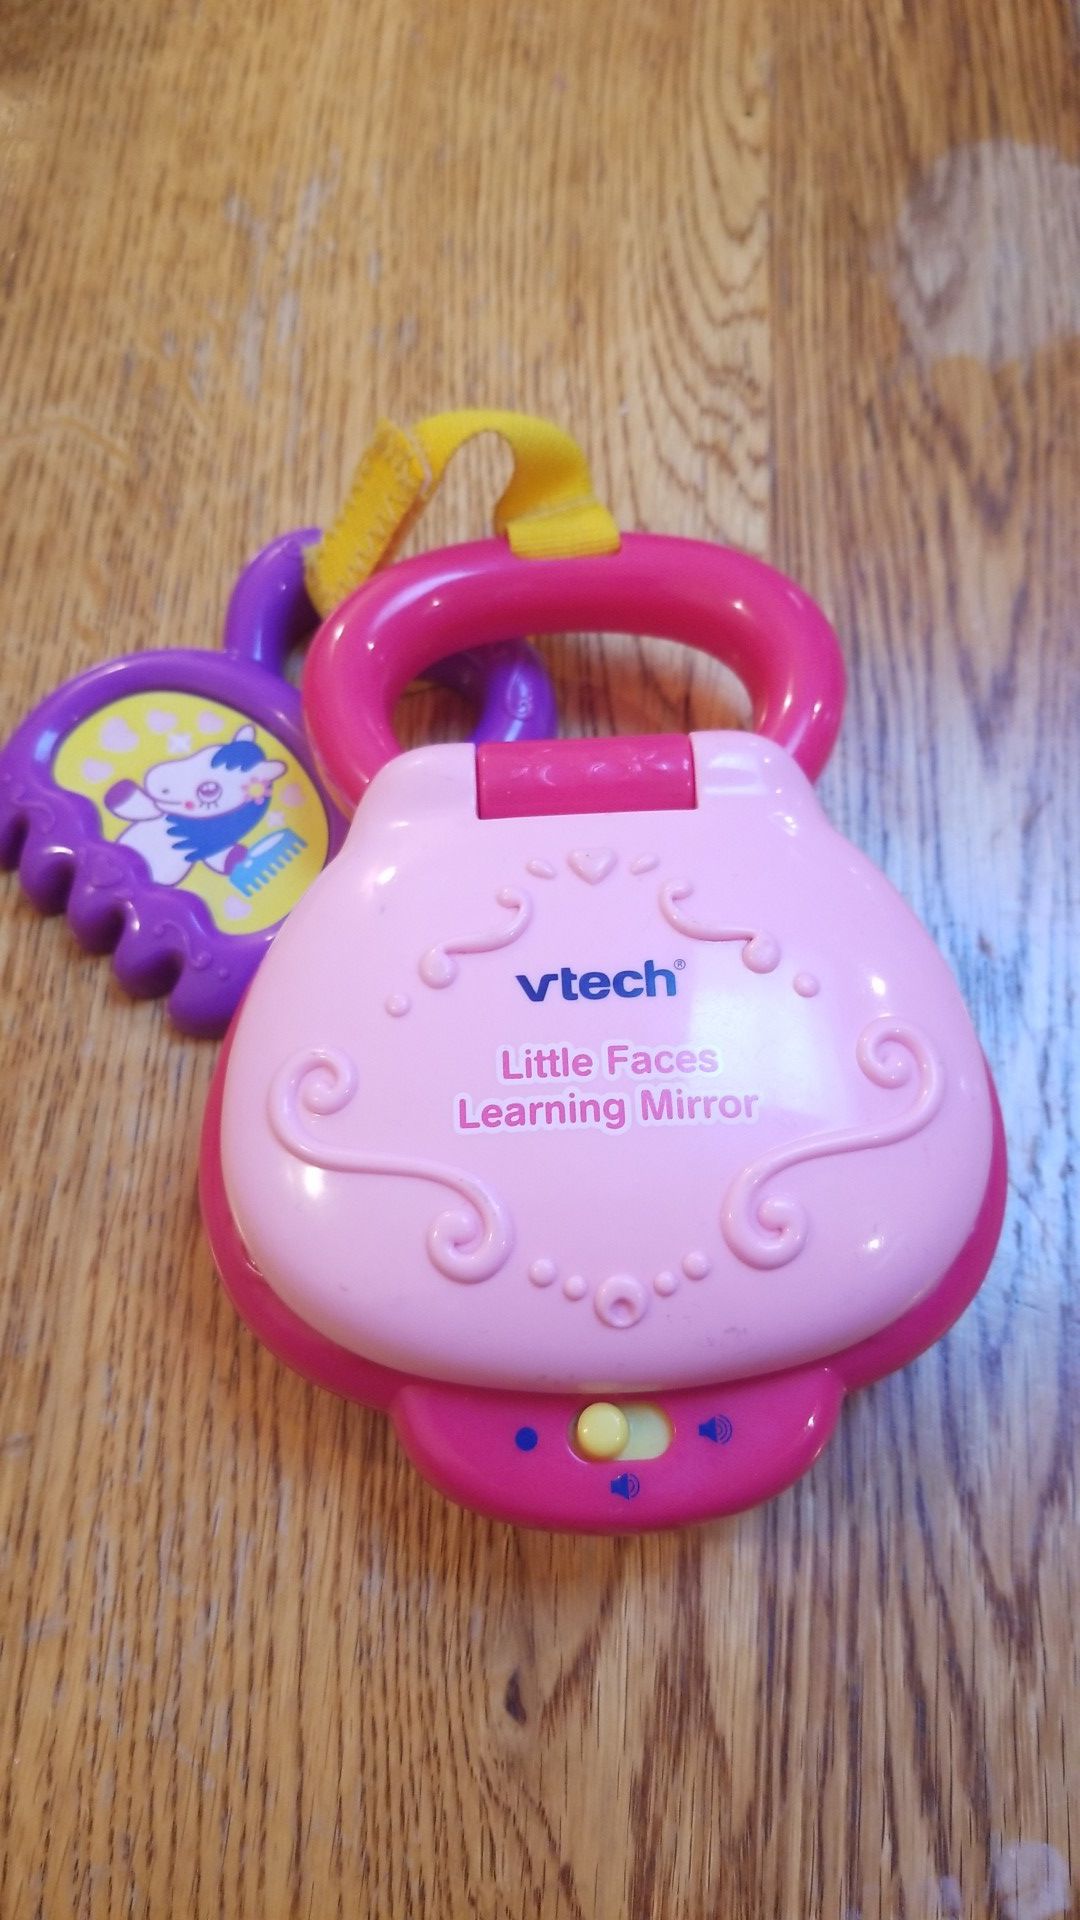 Used VTech little faces learning mirror